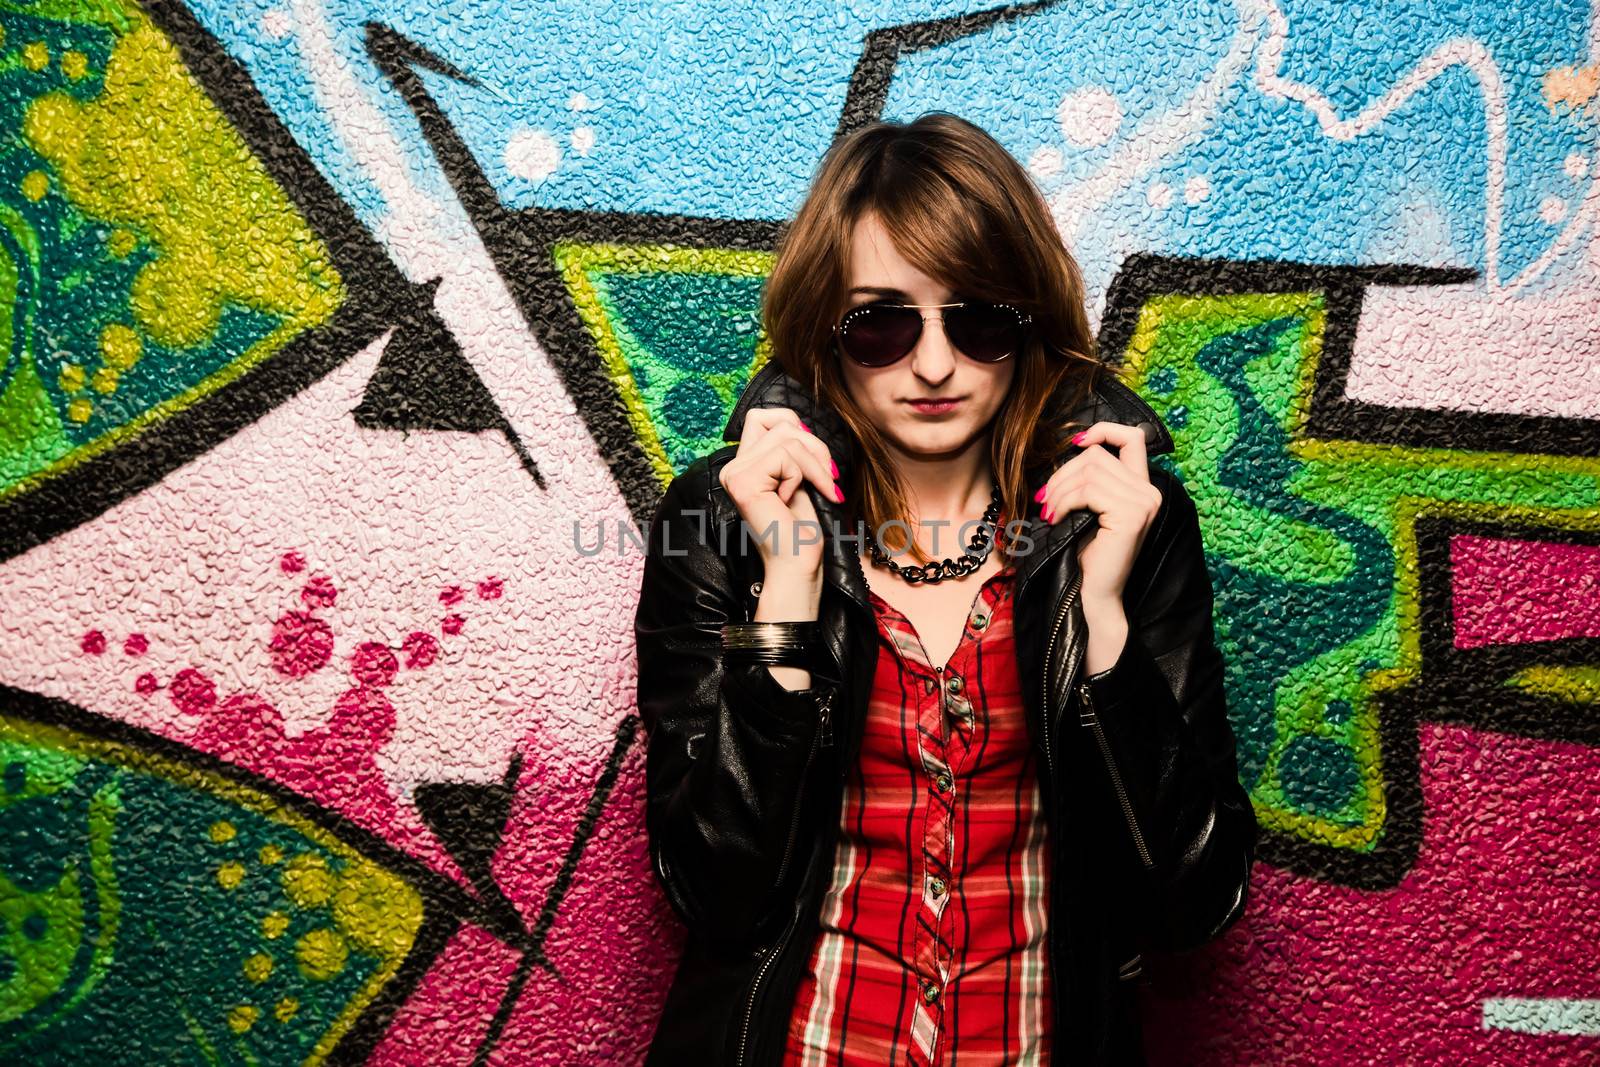 Stylish fashionable girl posing against colorful graffiti wall. Fashion, trends, subculture